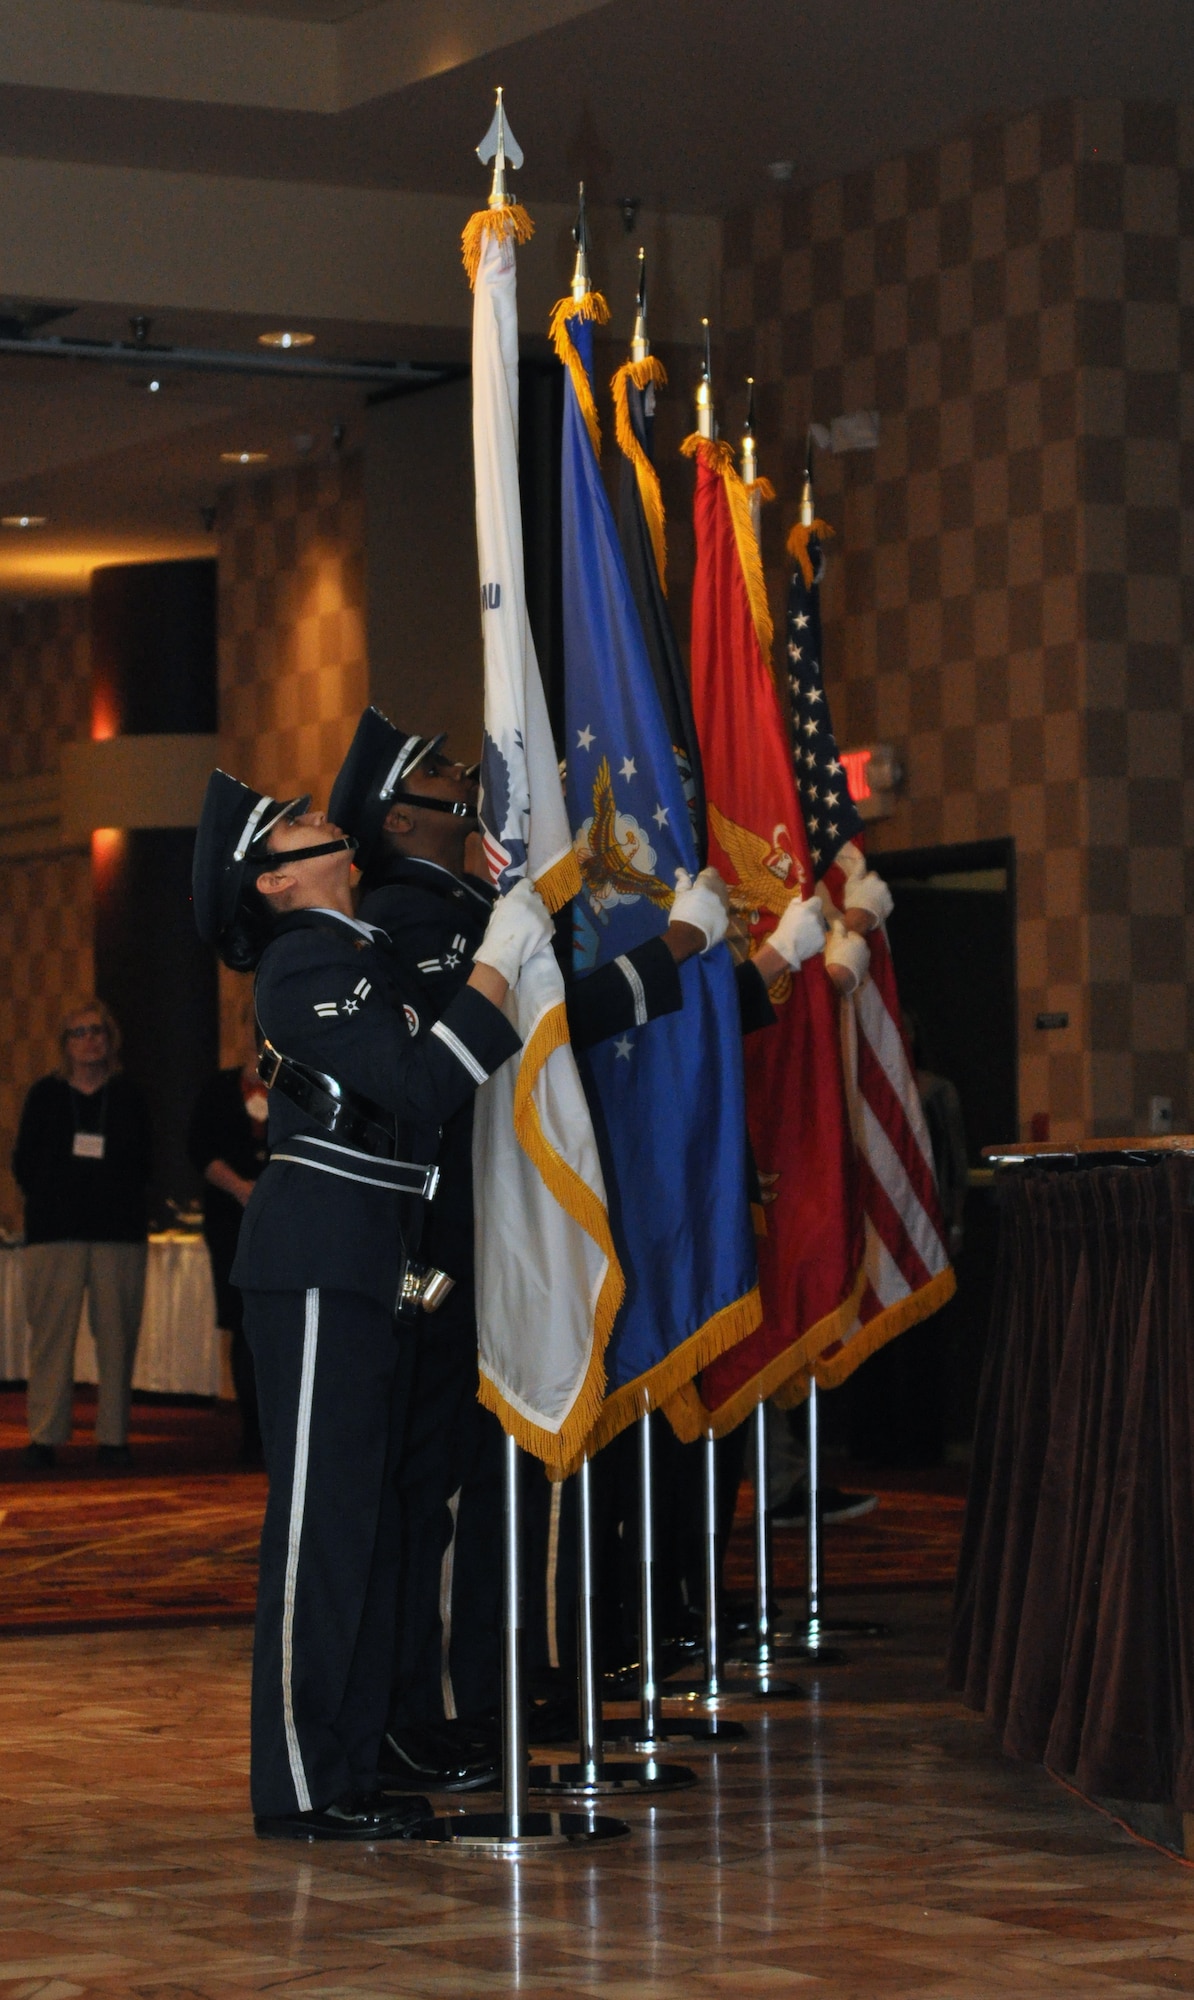 The Offutt Honor Guard posts the colors from each branch of military service as well as the American flag to mark the beginning of the inaugural Salute to America’s Heroes dinner at the Omaha Ramada Inn Feb. 16. Attendees were given two nights at a hotel, tickets to the Durham Museum, Joslyn Art Museum and Omaha Children’s Museum, and passes to the Coco Key indoor water resort all for free thanks to the Wounded Warrior Family Support Program. (Photo by Ryan Hansen)